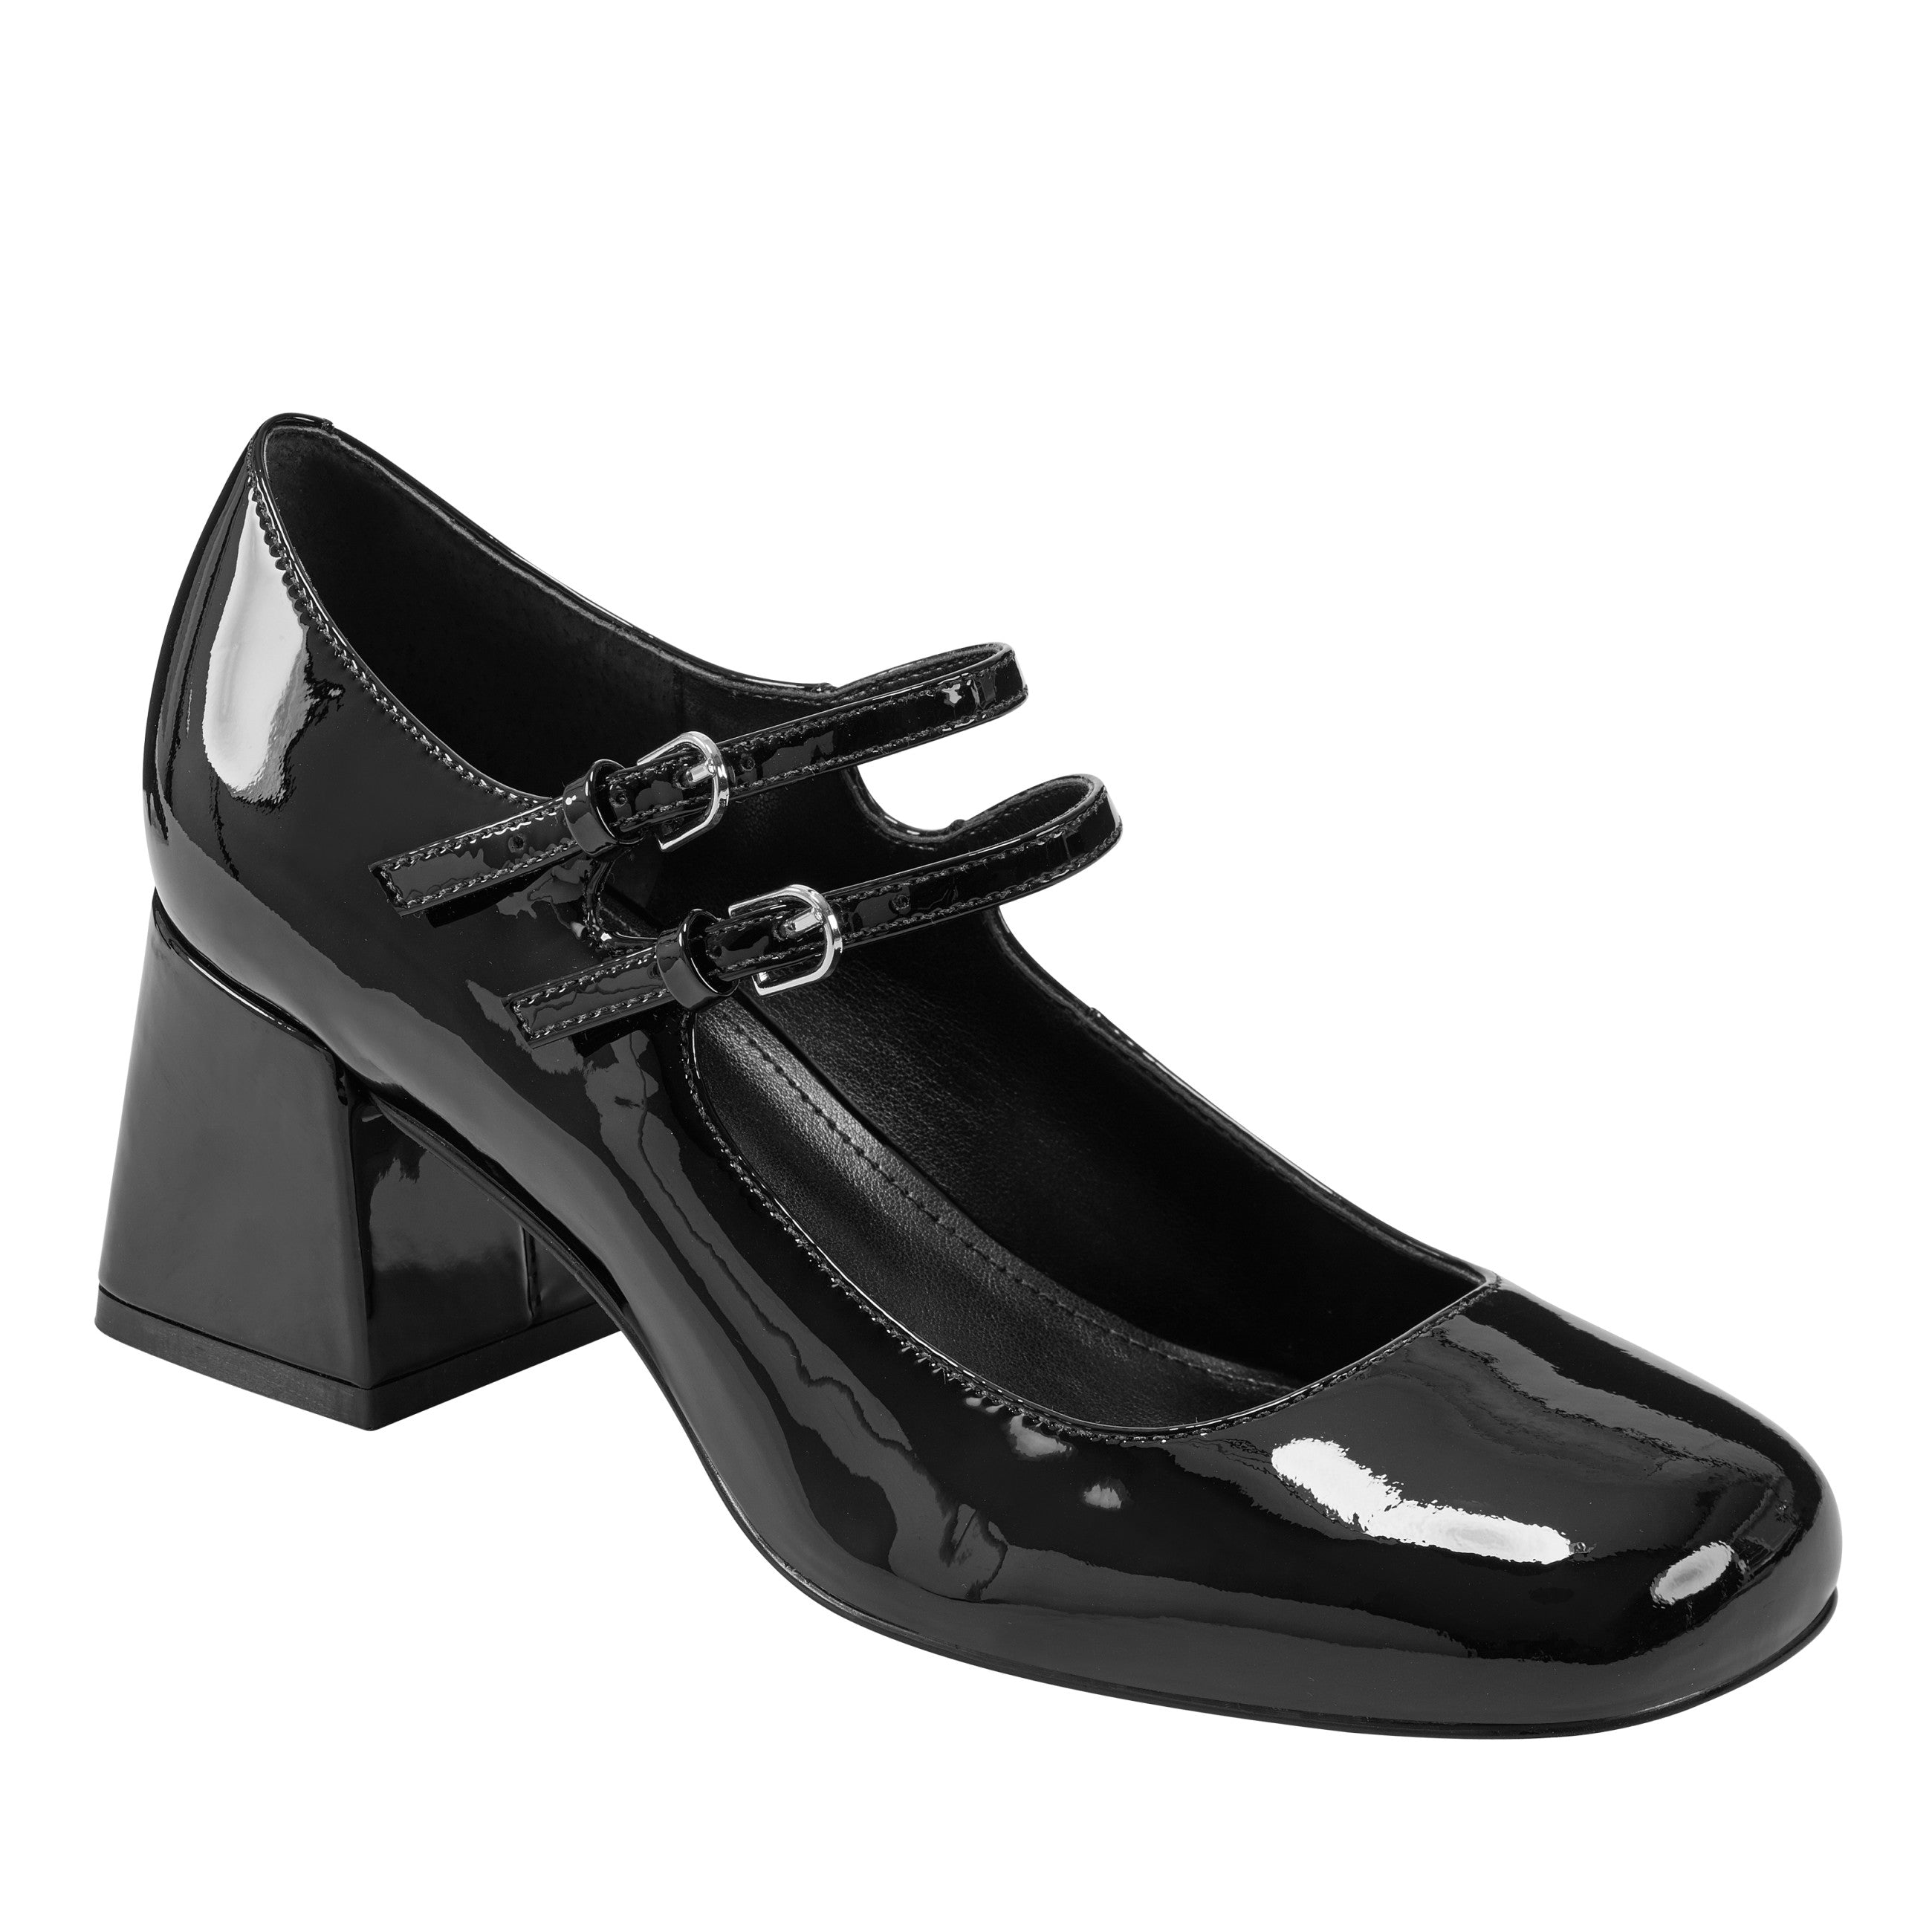 Mid-Heel Mary Jane Shoes - Black | Mary jane shoes heels, Mary jane shoes, Mary  jane shoes black